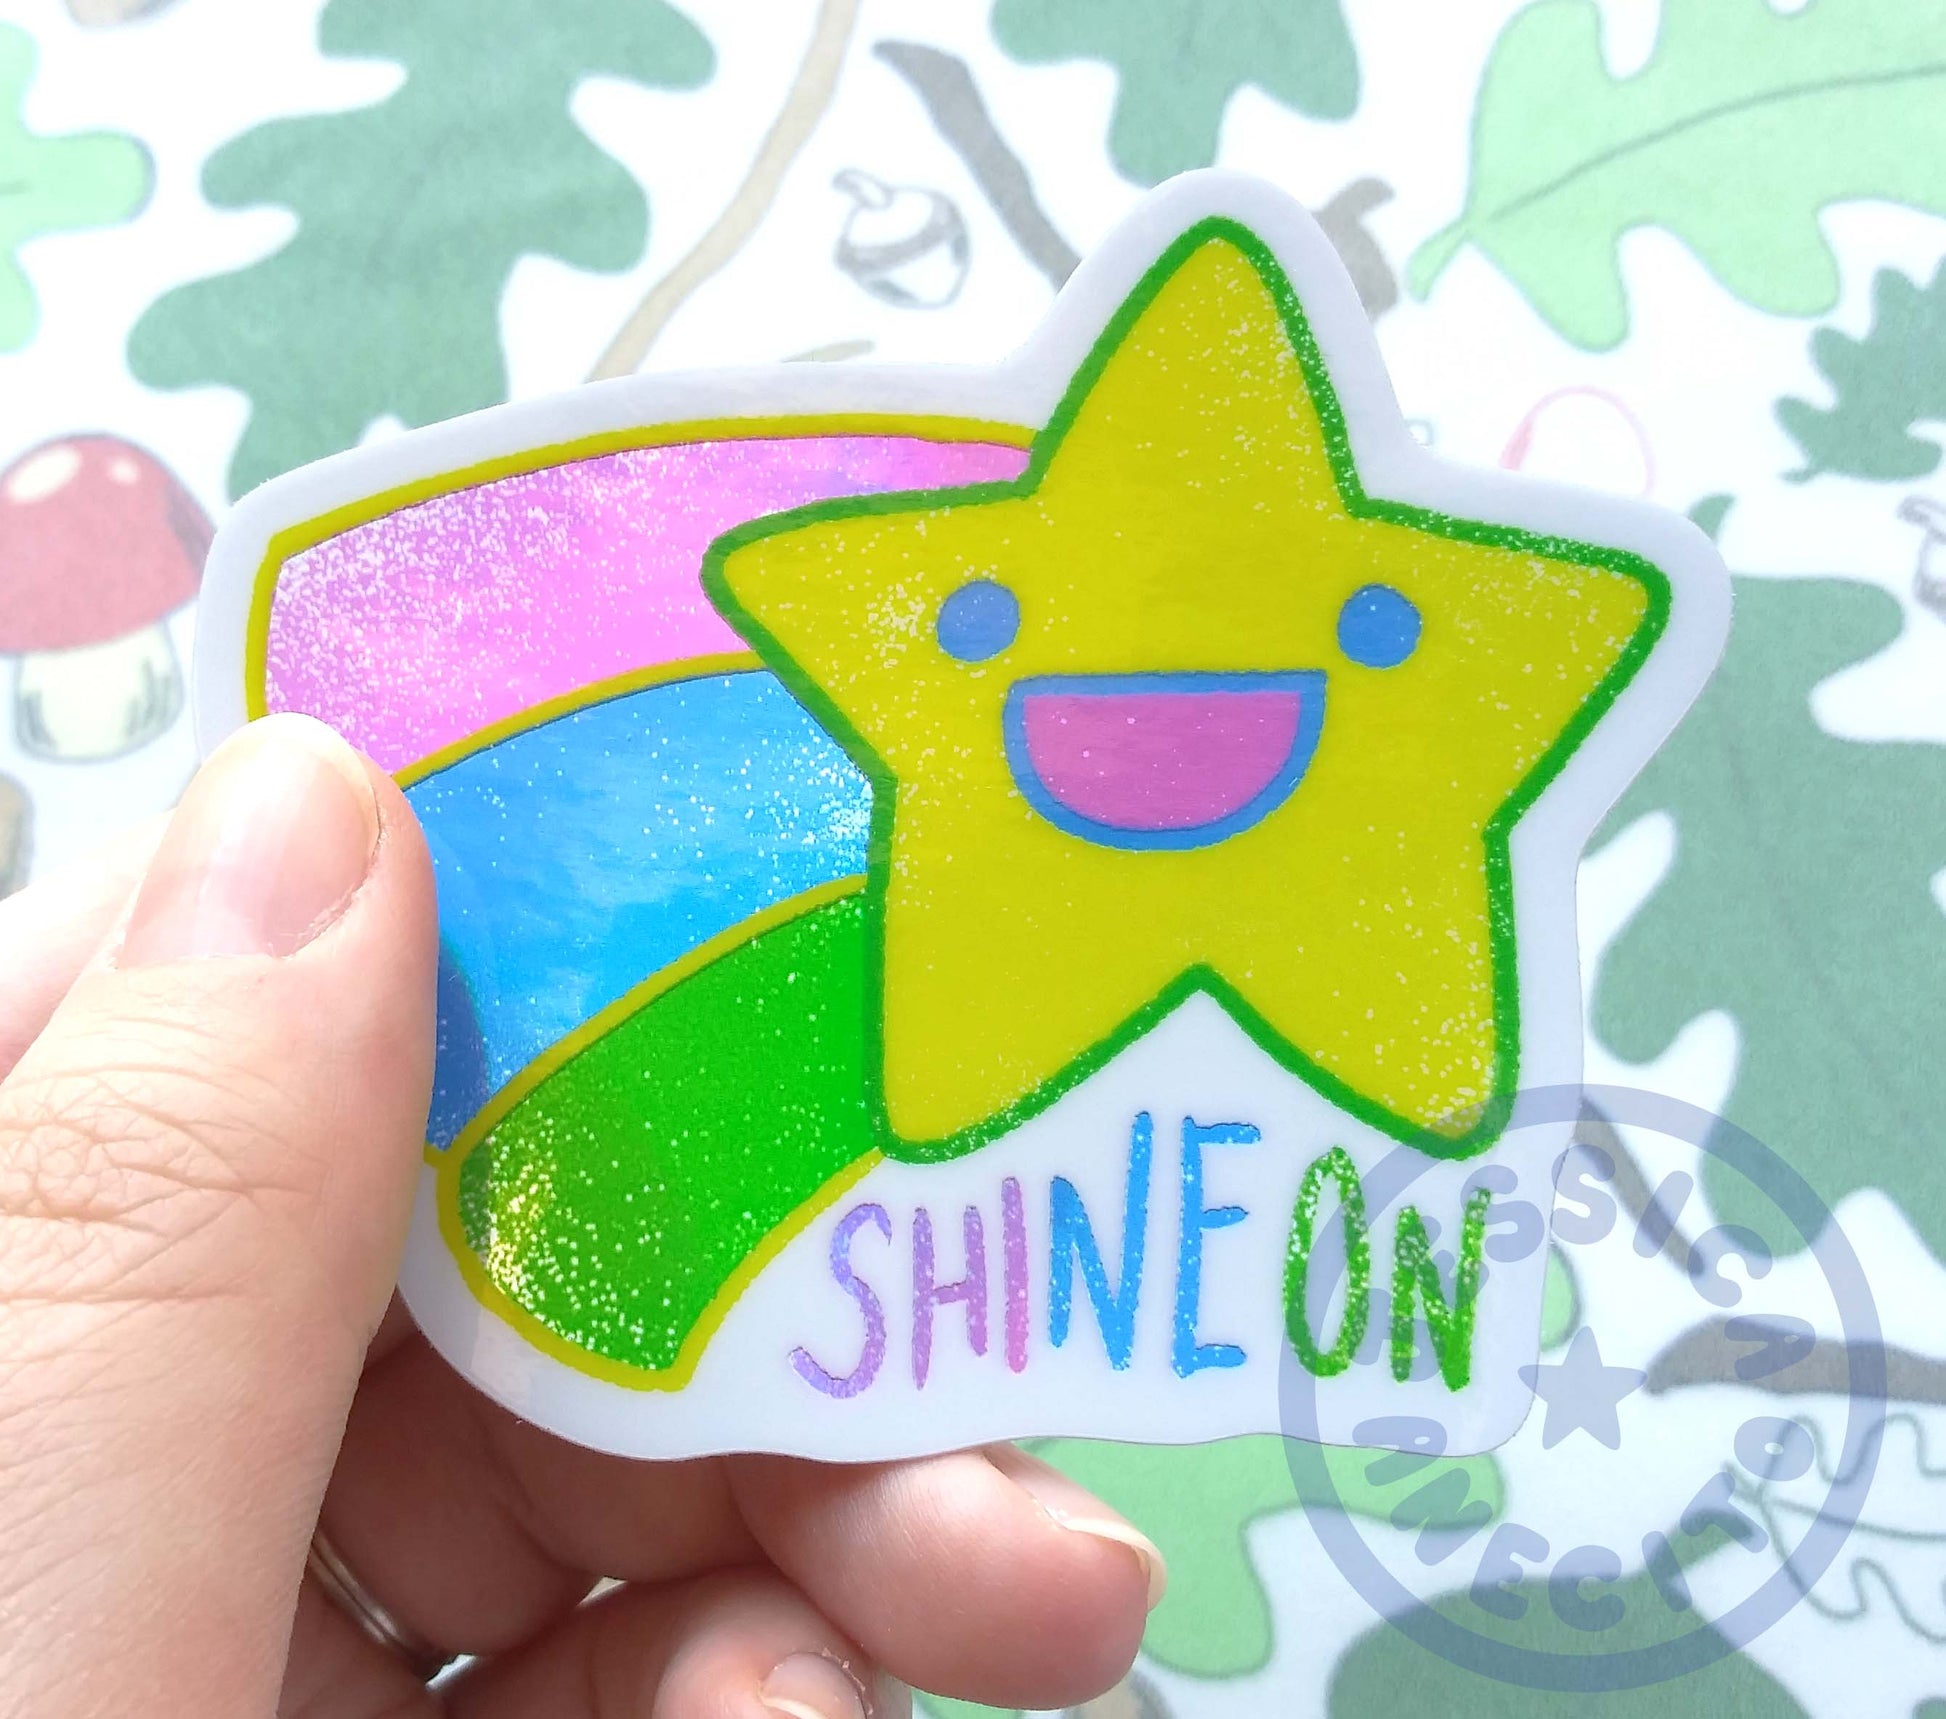 A hand is holding a shiny sticker of a shooting star. The star has a simple smiling face and three colors indicating it's a shooting star coming out of the left side in stripes. The stripes are pink, blue and green. Text under the star shape reads, "Shine on"